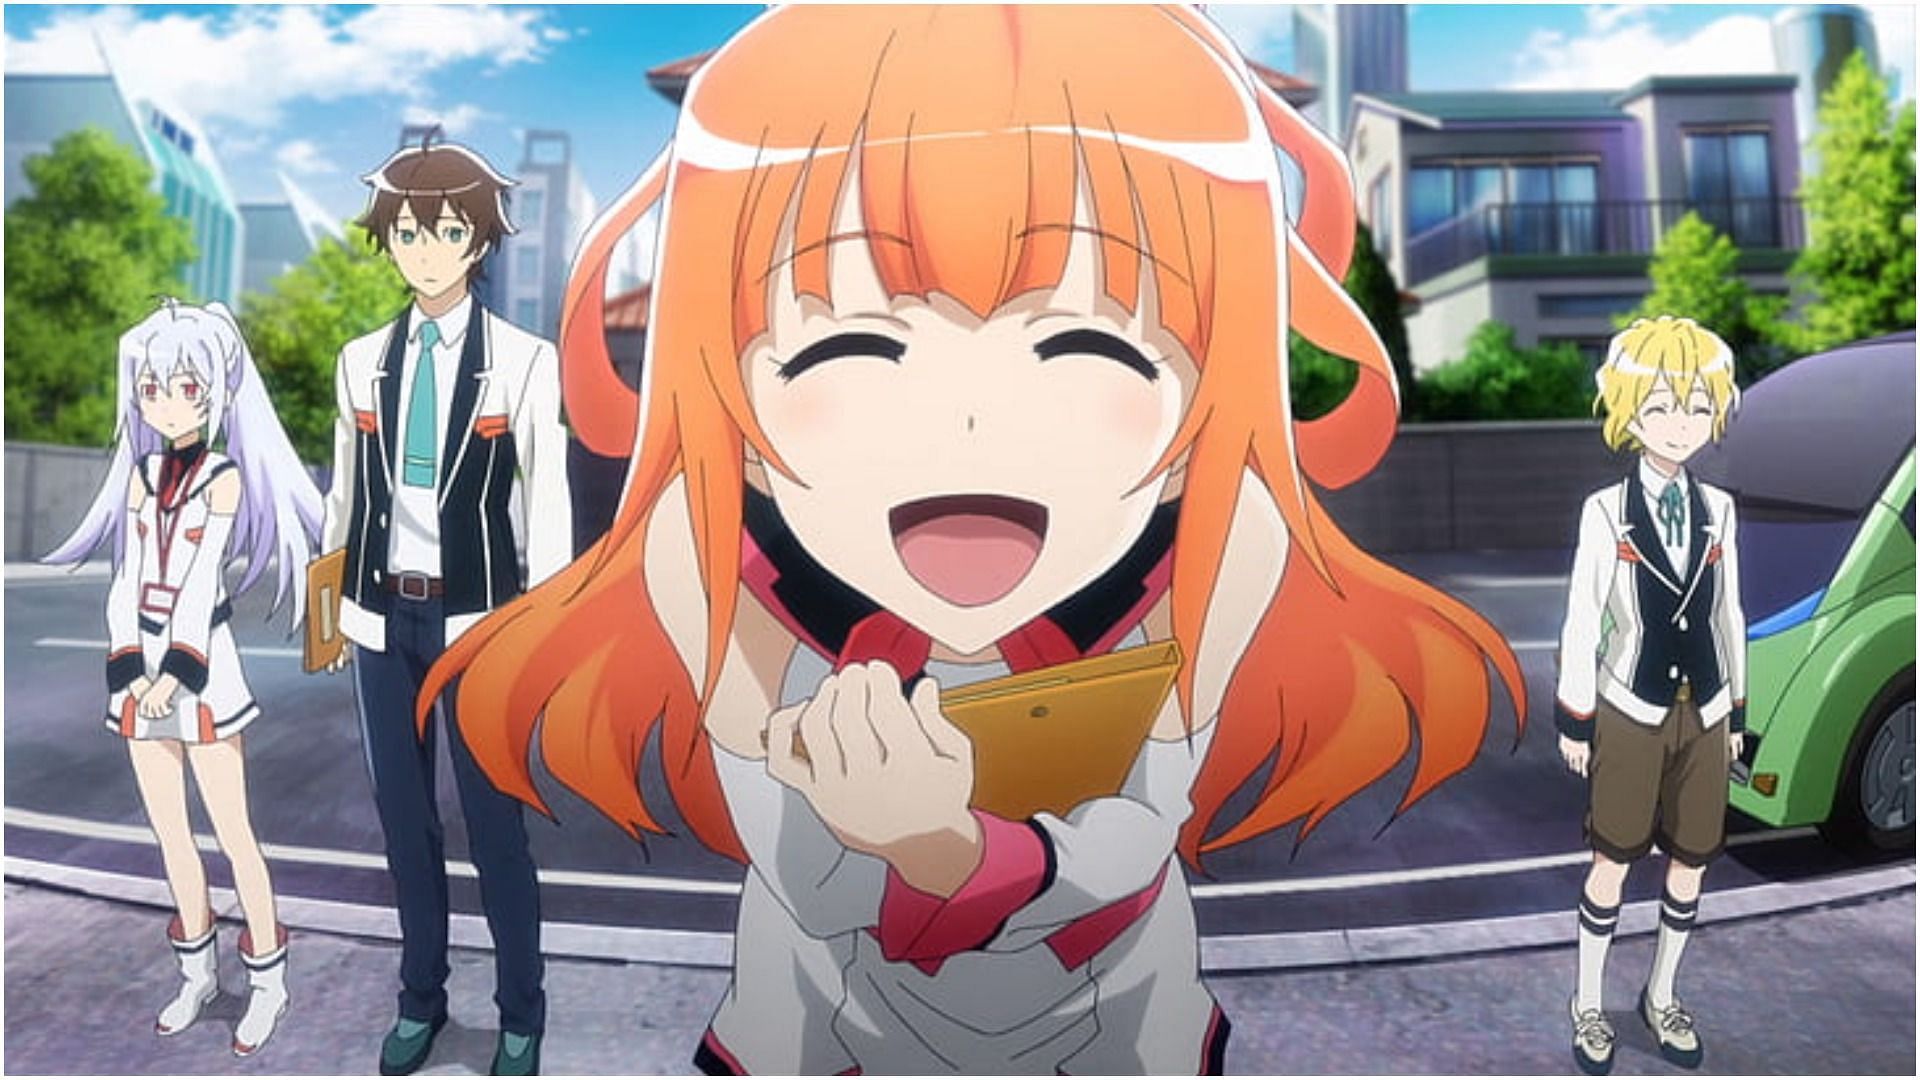 All key characters of Plastic Memories as seen in the anime (image via Doga Kobo)